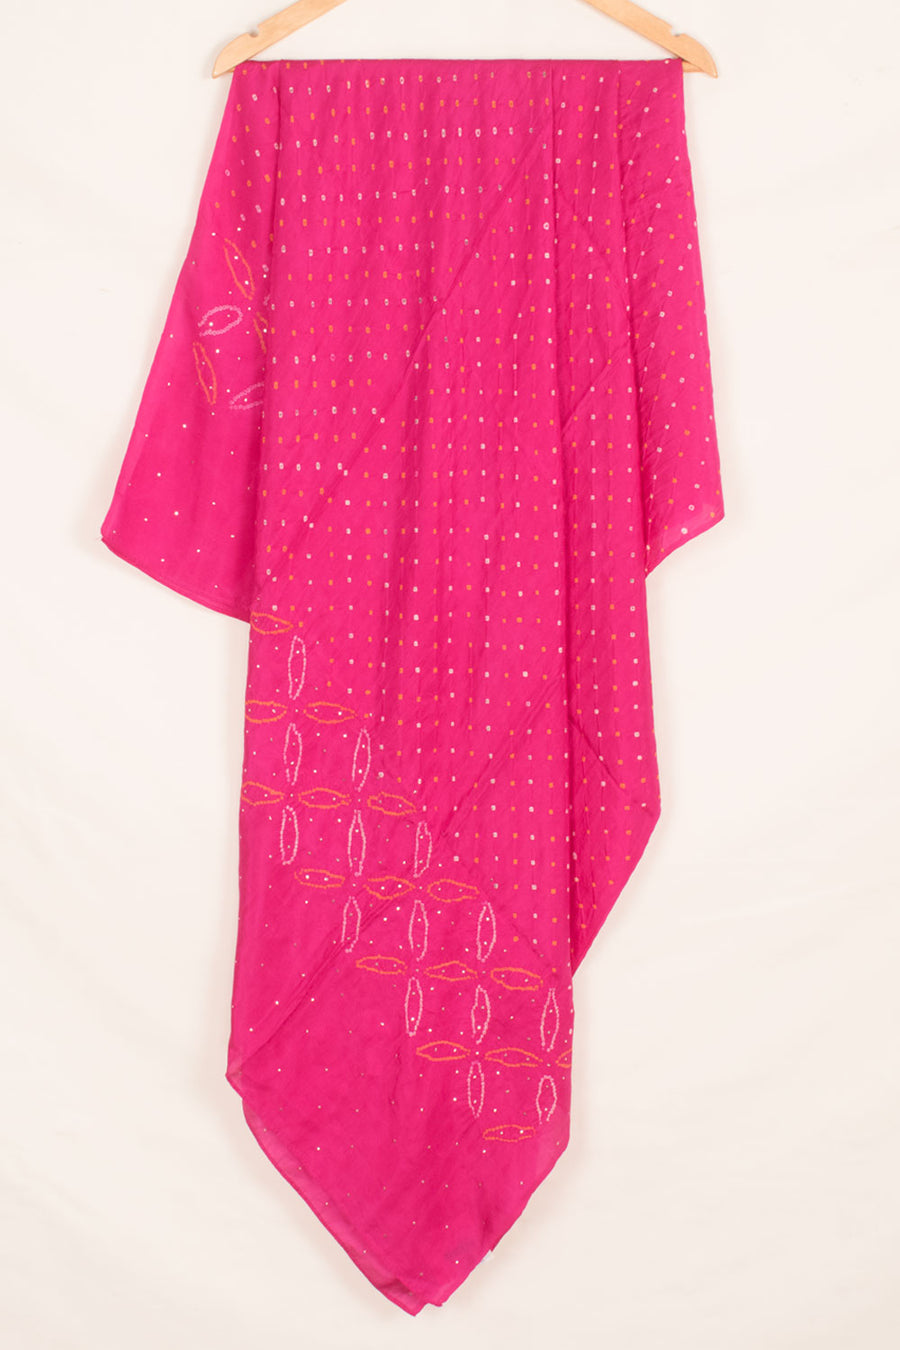 Handcrafted Bandhani Mulberry Silk Dupatta with Mukaish Embroidery